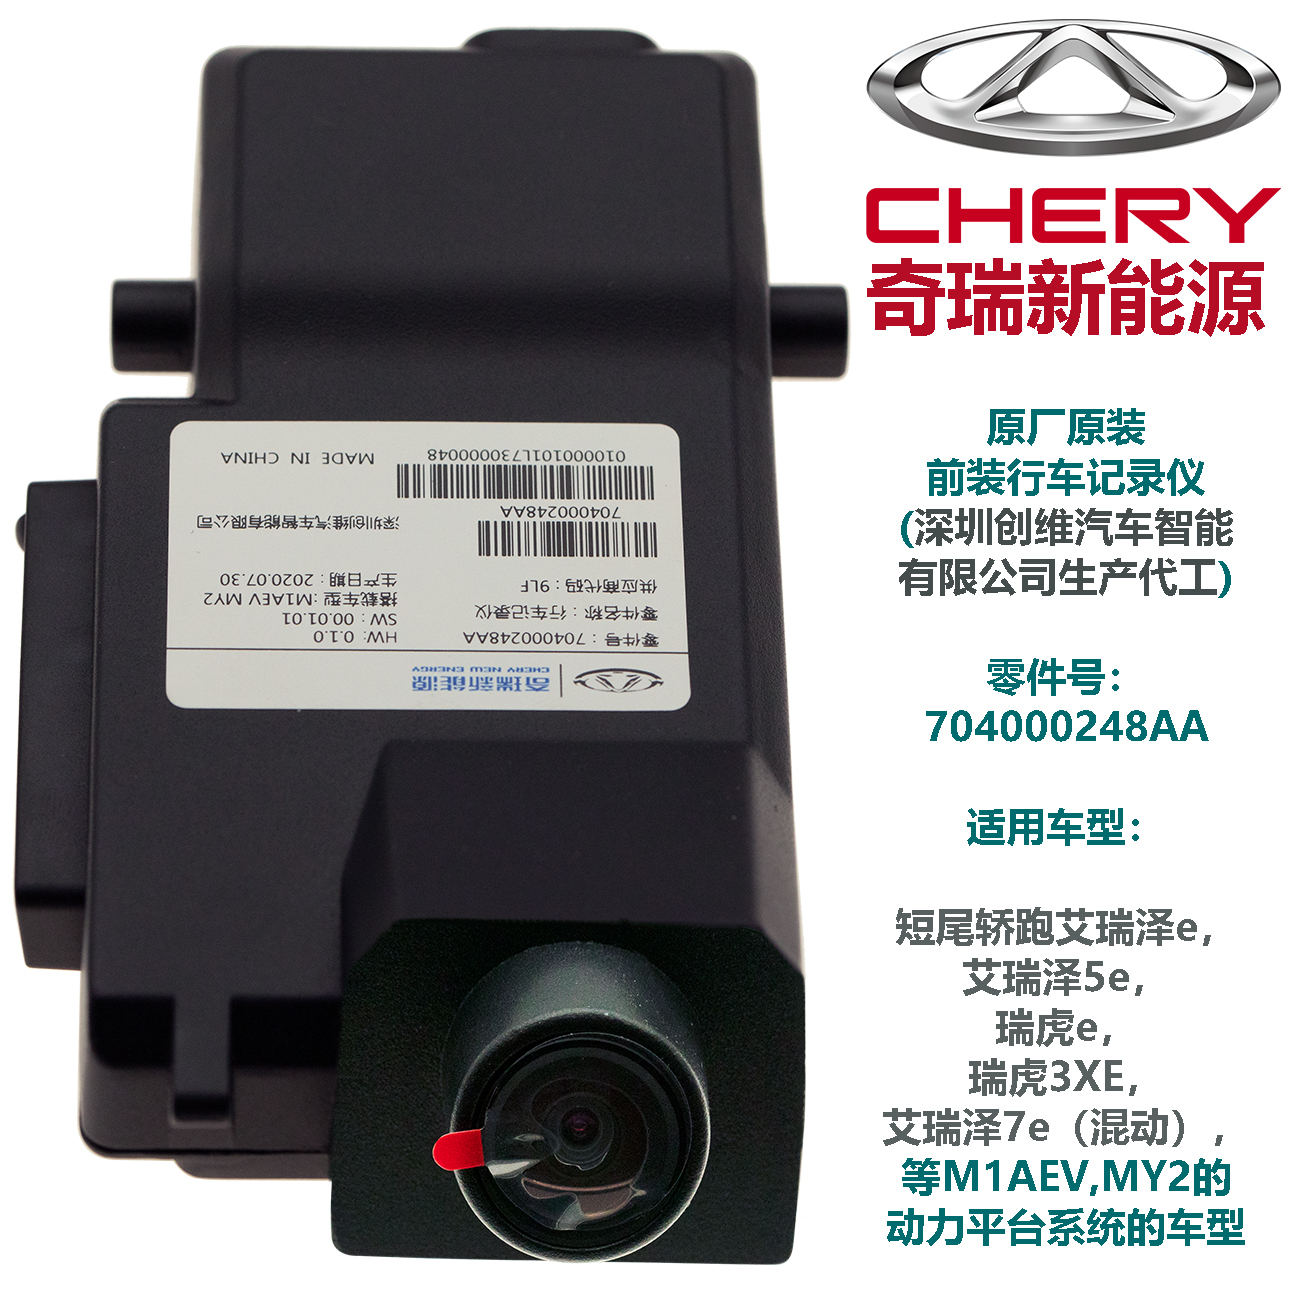 Chery new energy vehicle recorder，factory before the original installation recorder，special tache-recorder, car black box, car DVR, car video recorder, driving recorder, traffic accident forensics，Automobile vehical data recorder，704000606AA,704000607AA,704000608AA,704000251AA,704000252AA,704000087AA,704000228AA,704000248AA